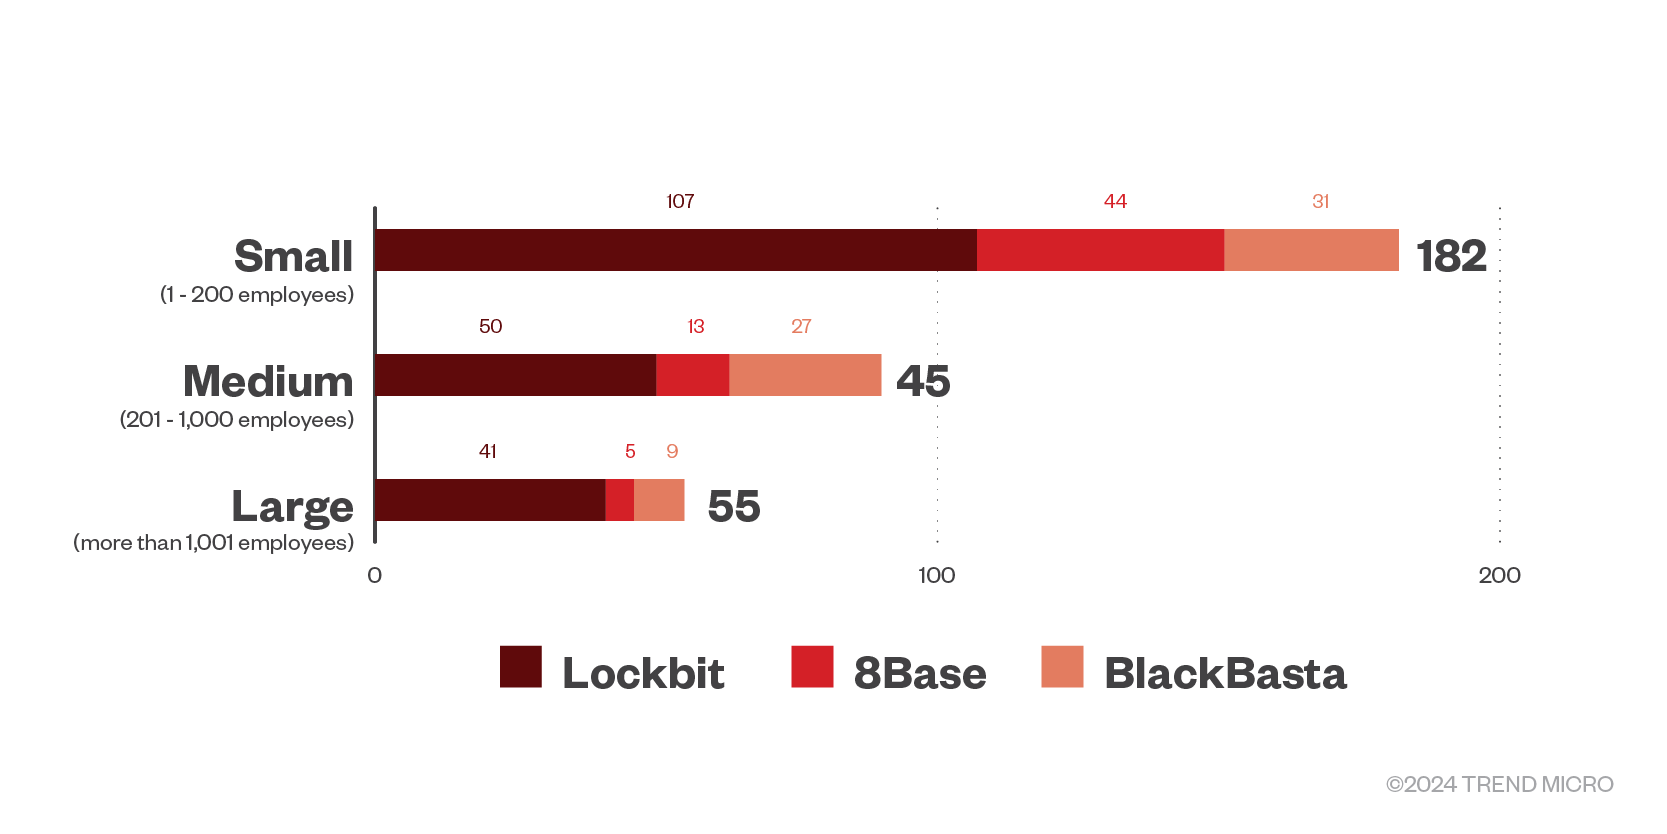 The distribution by organization size of LockBit, 8Base, and BlackBasta ransomware’s successful attacks in terms of victim organizations in the first quarter of 2024.